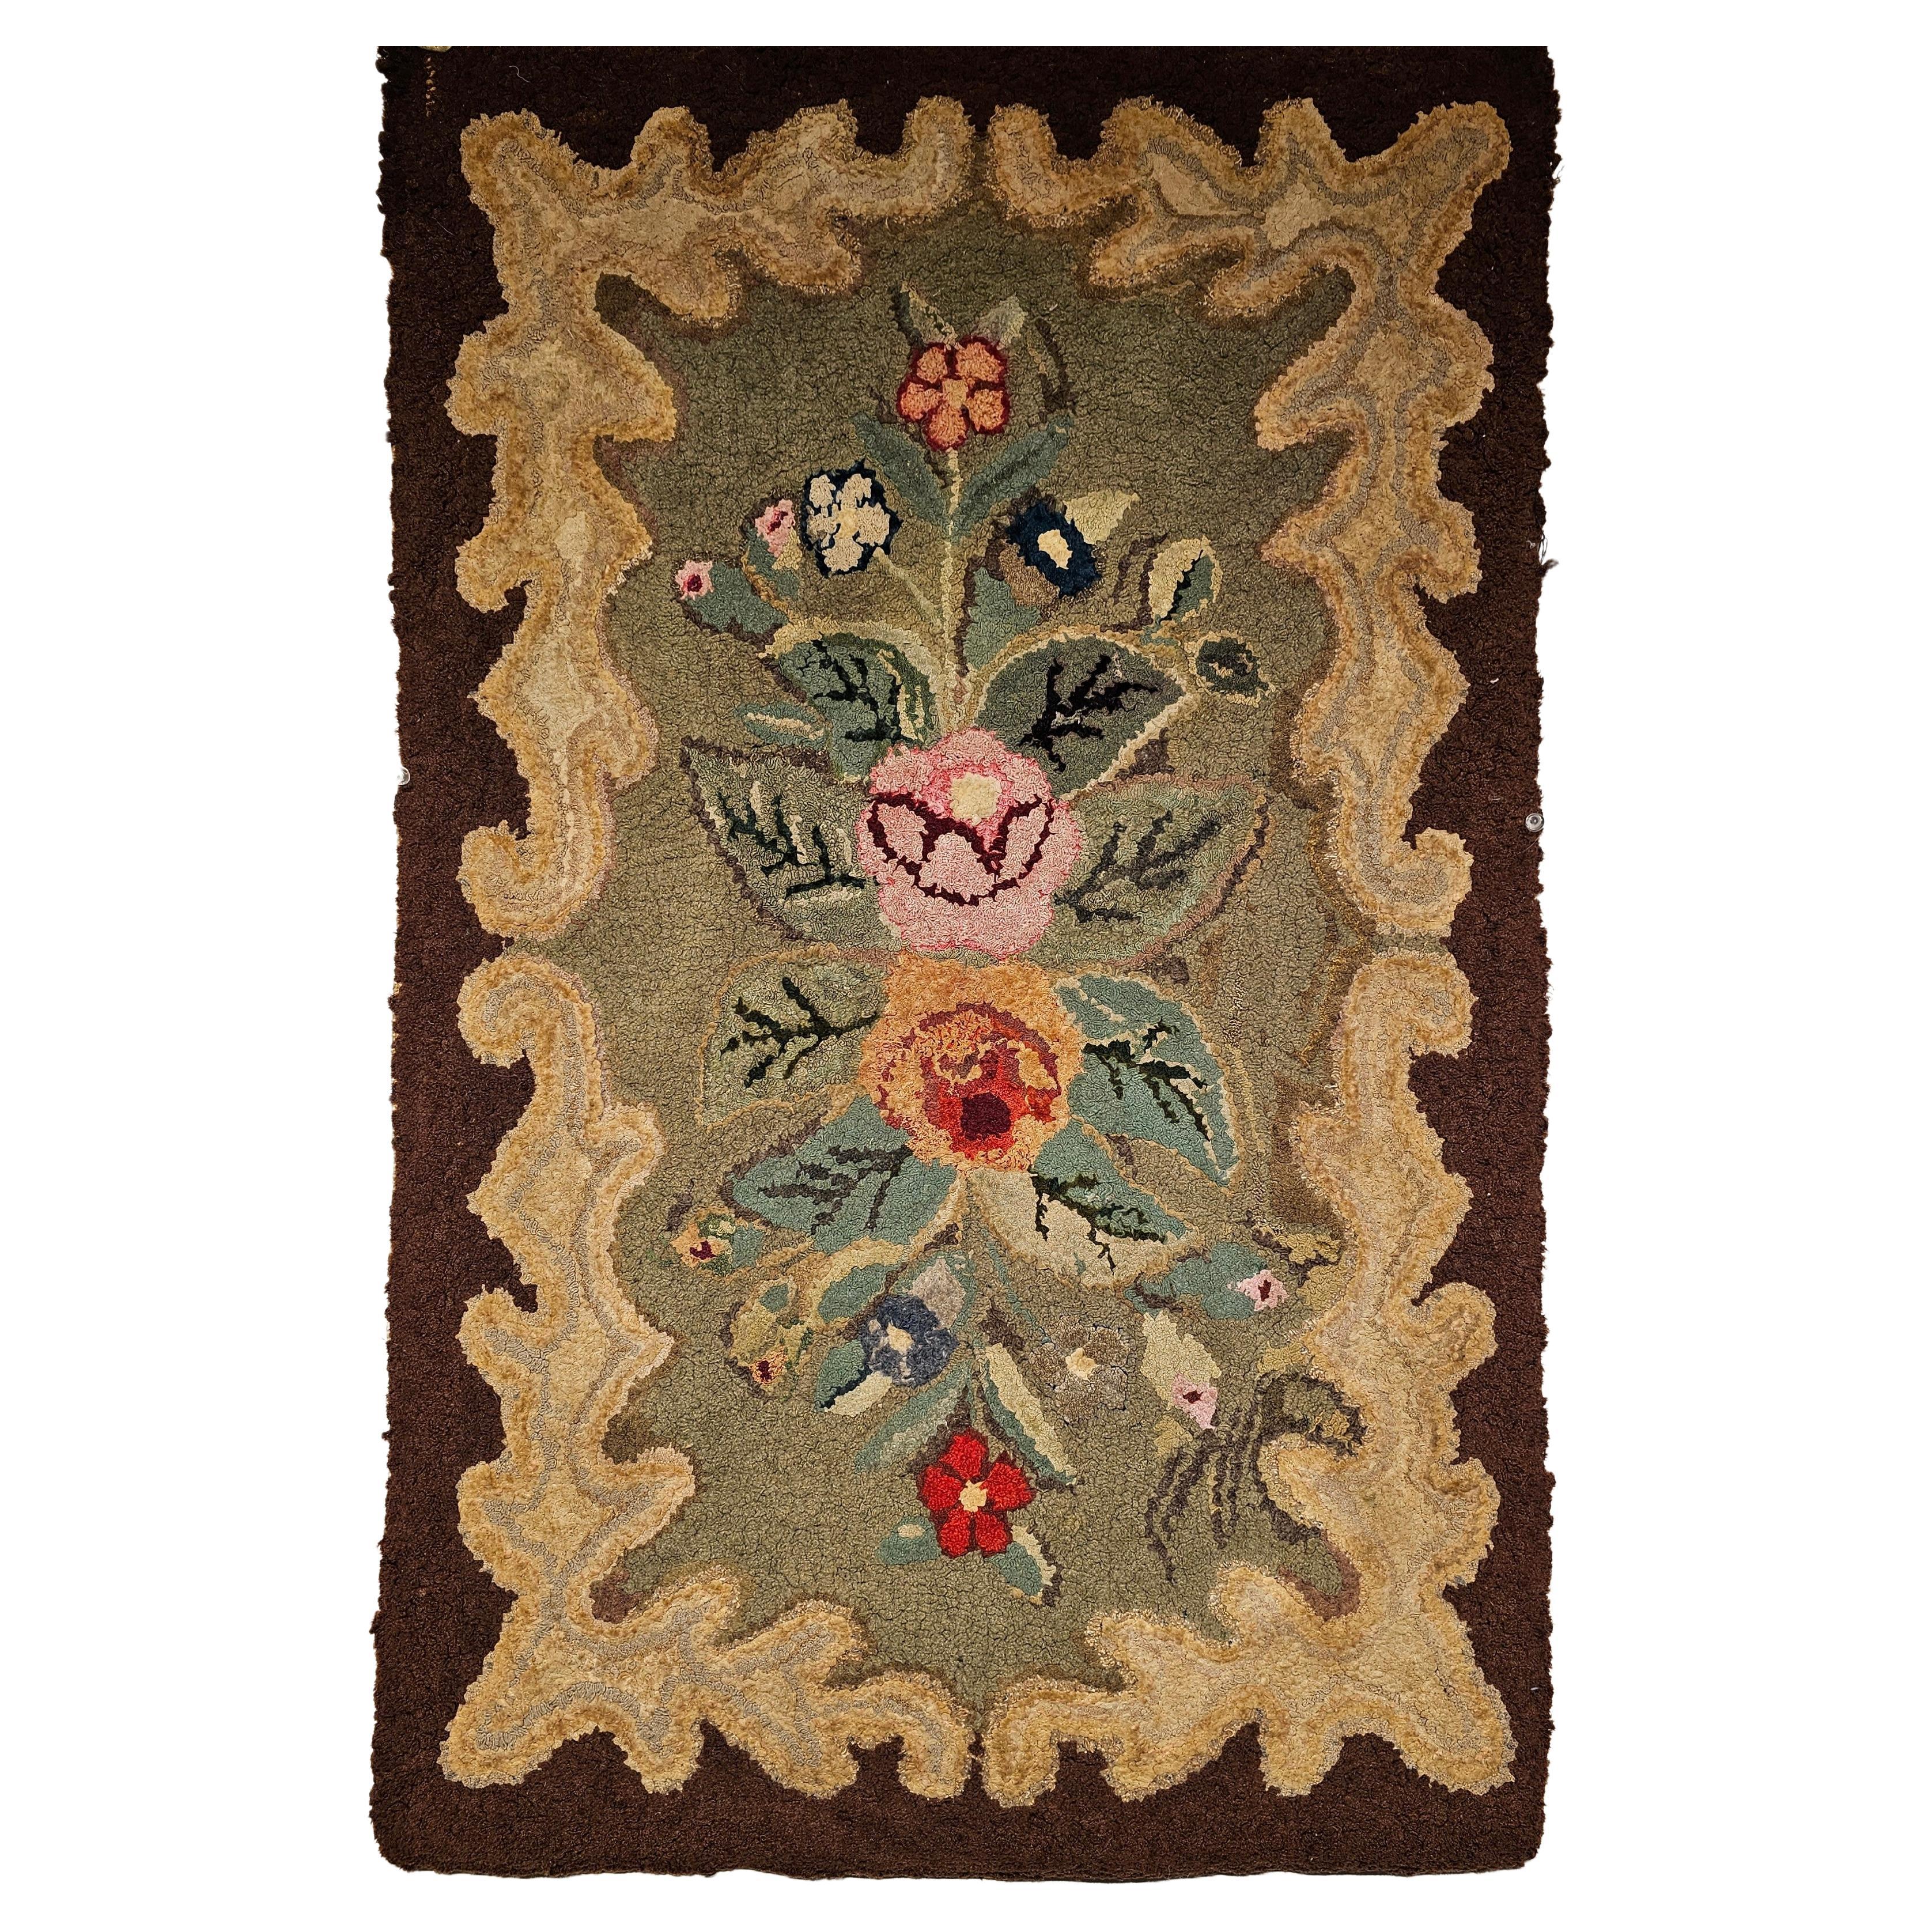 Early American Hand Hooked Rug with a Floral Pattern Wall Art